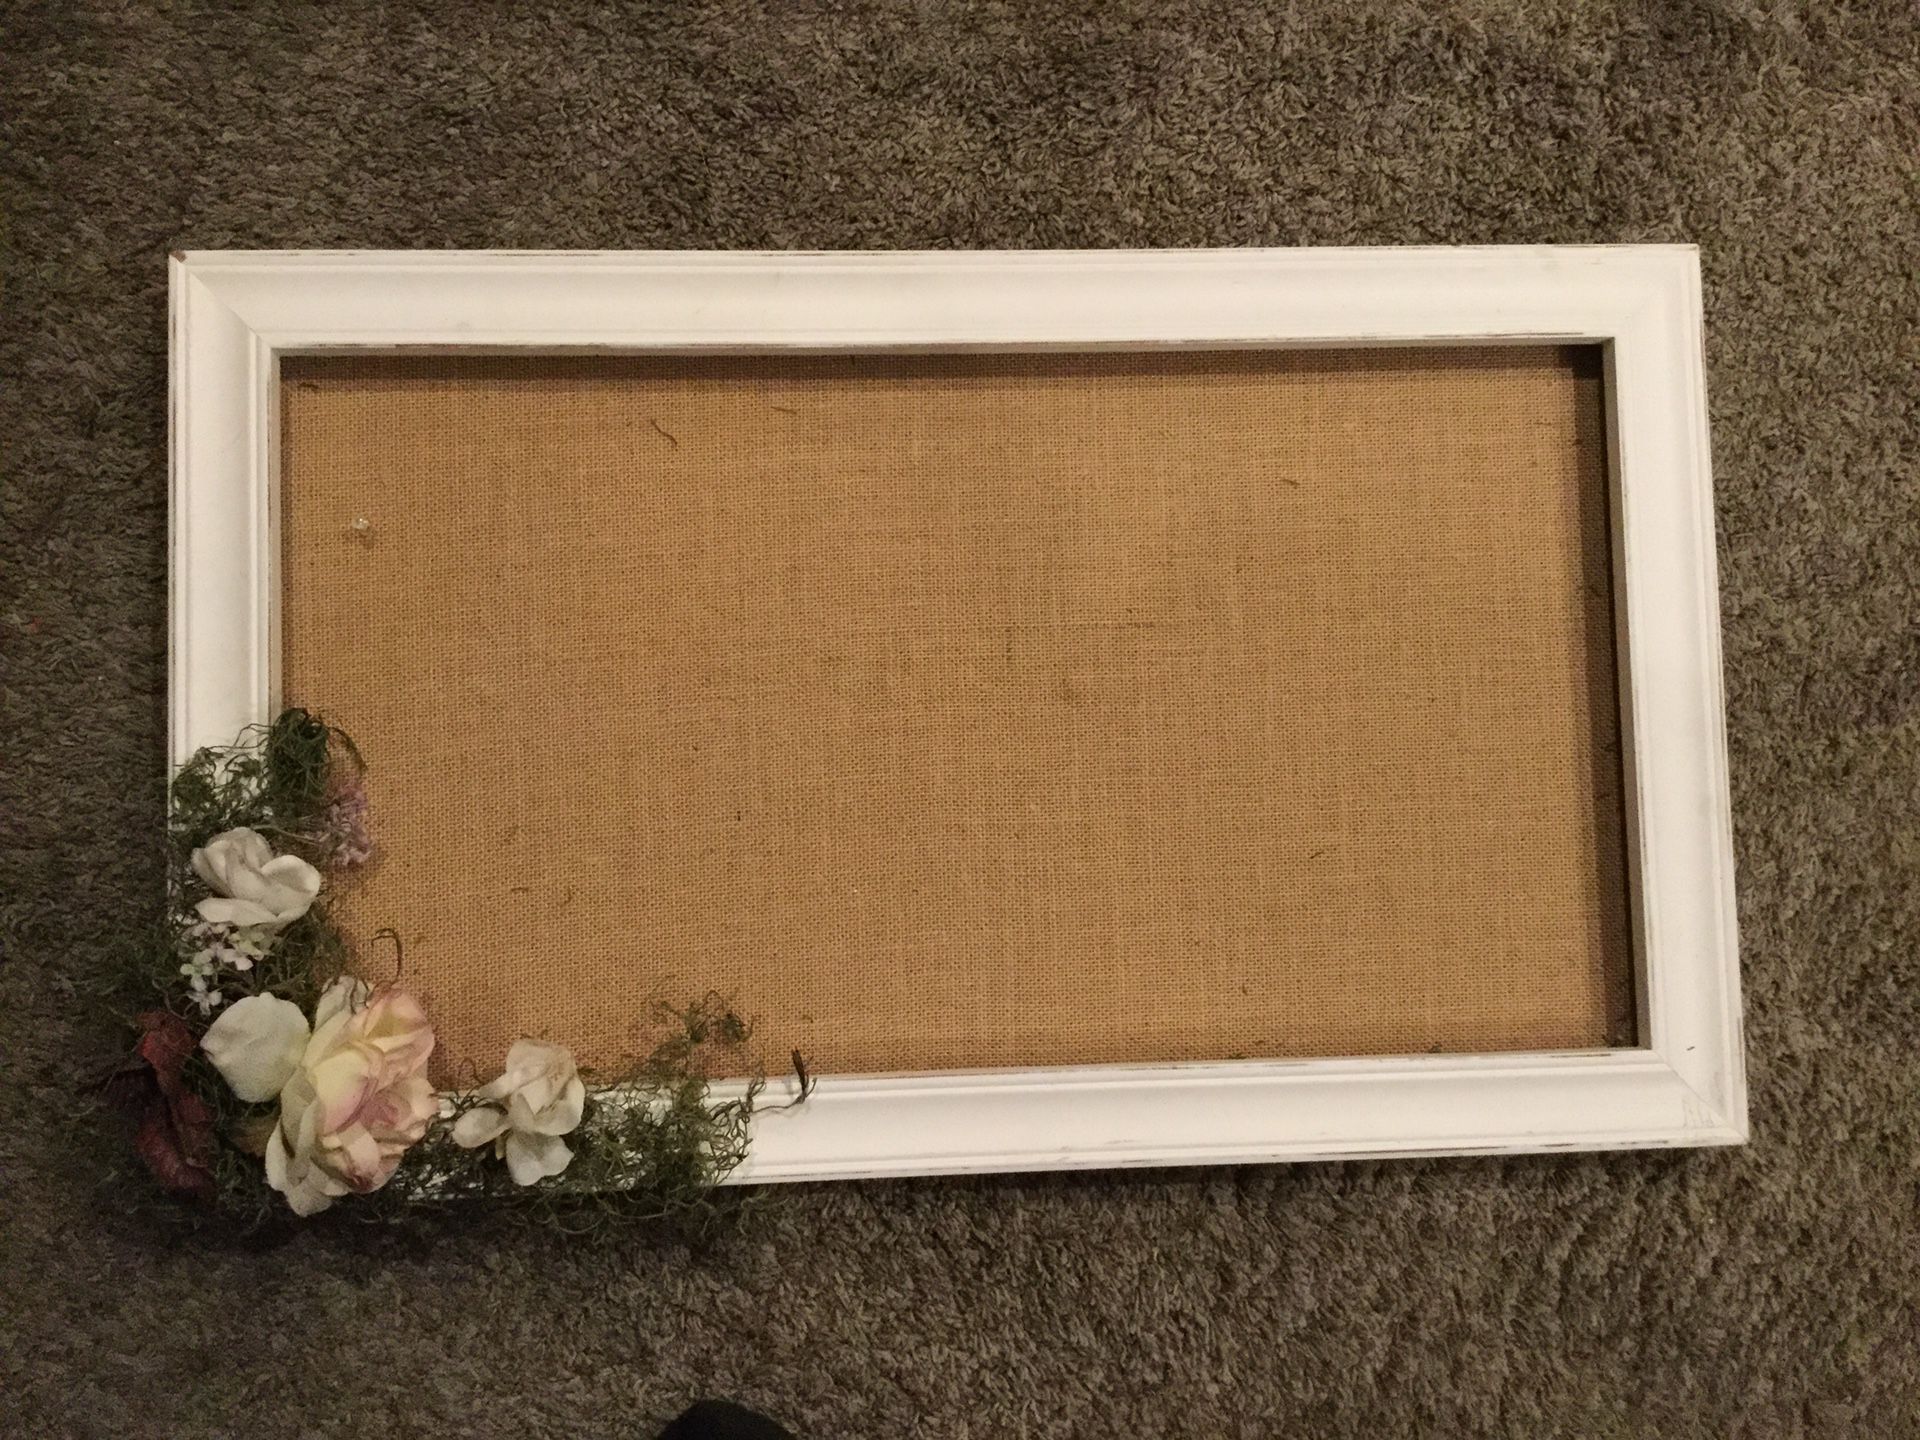 White frame with burlap backing great for wedding decor